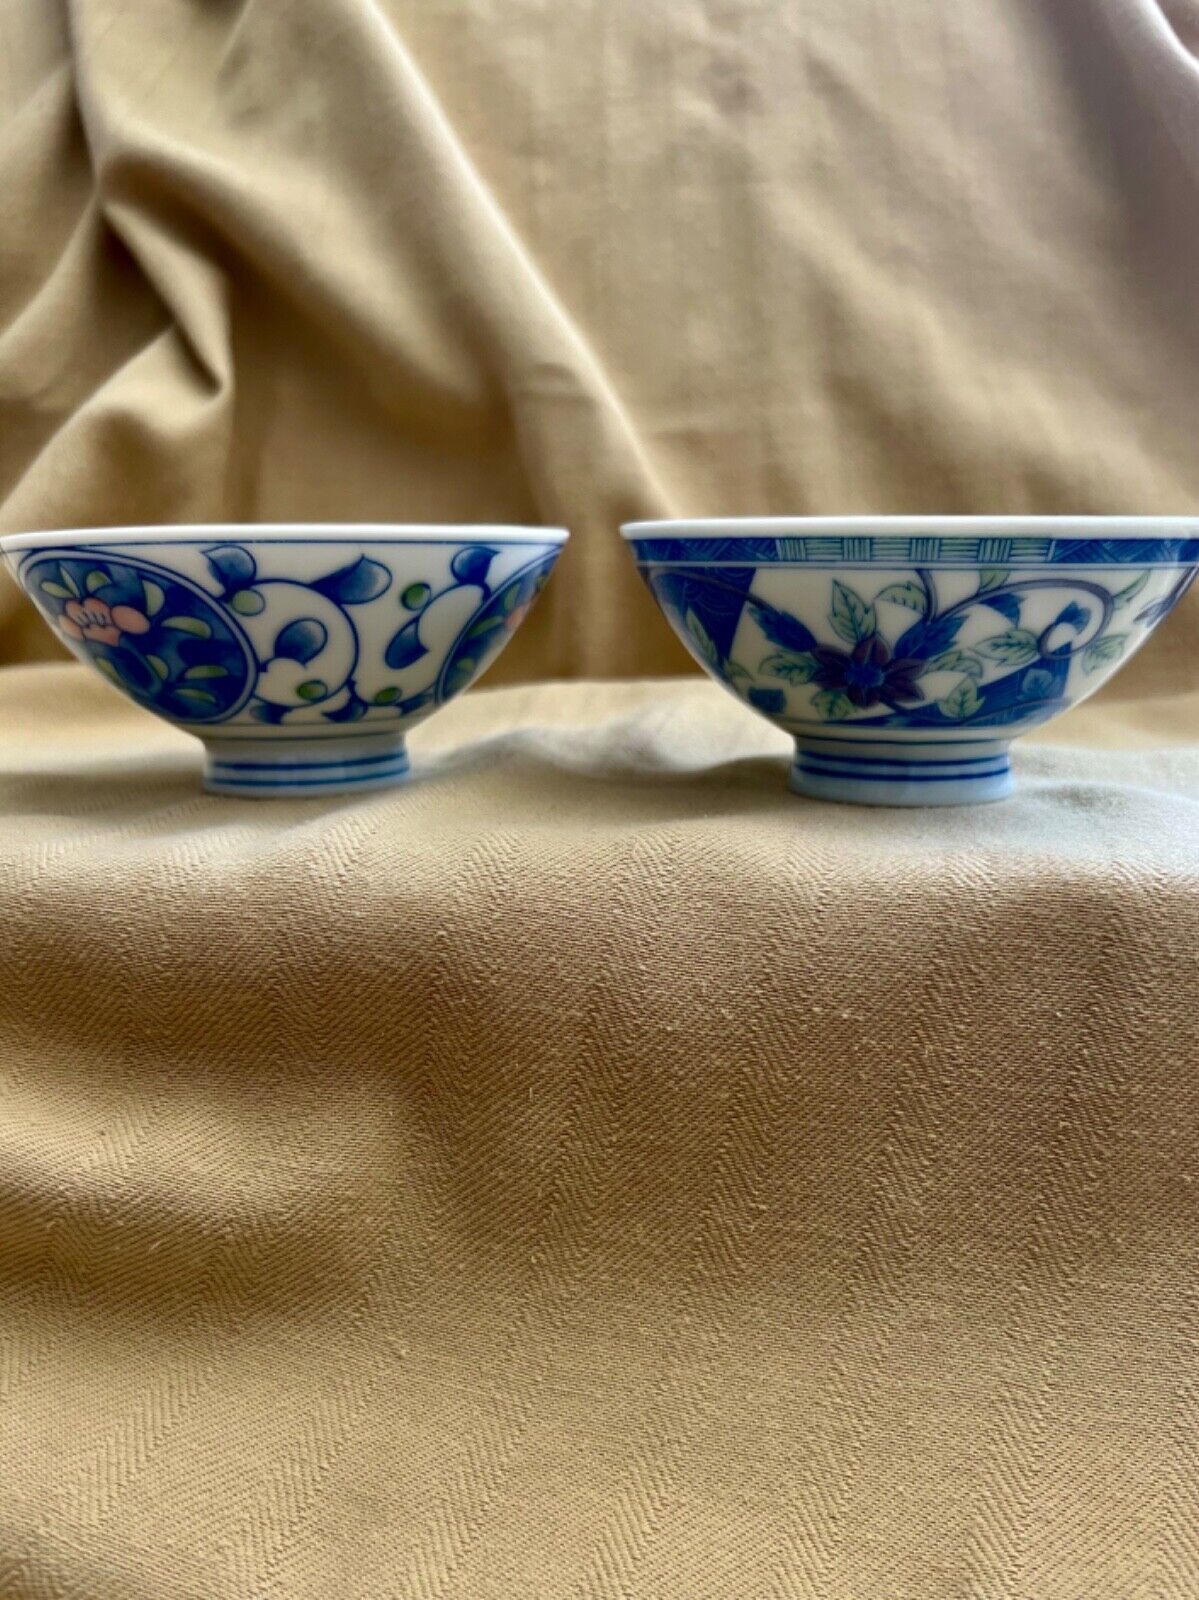 2 Vintage Rice Bowls- 2 Designs - delicate and beautiful